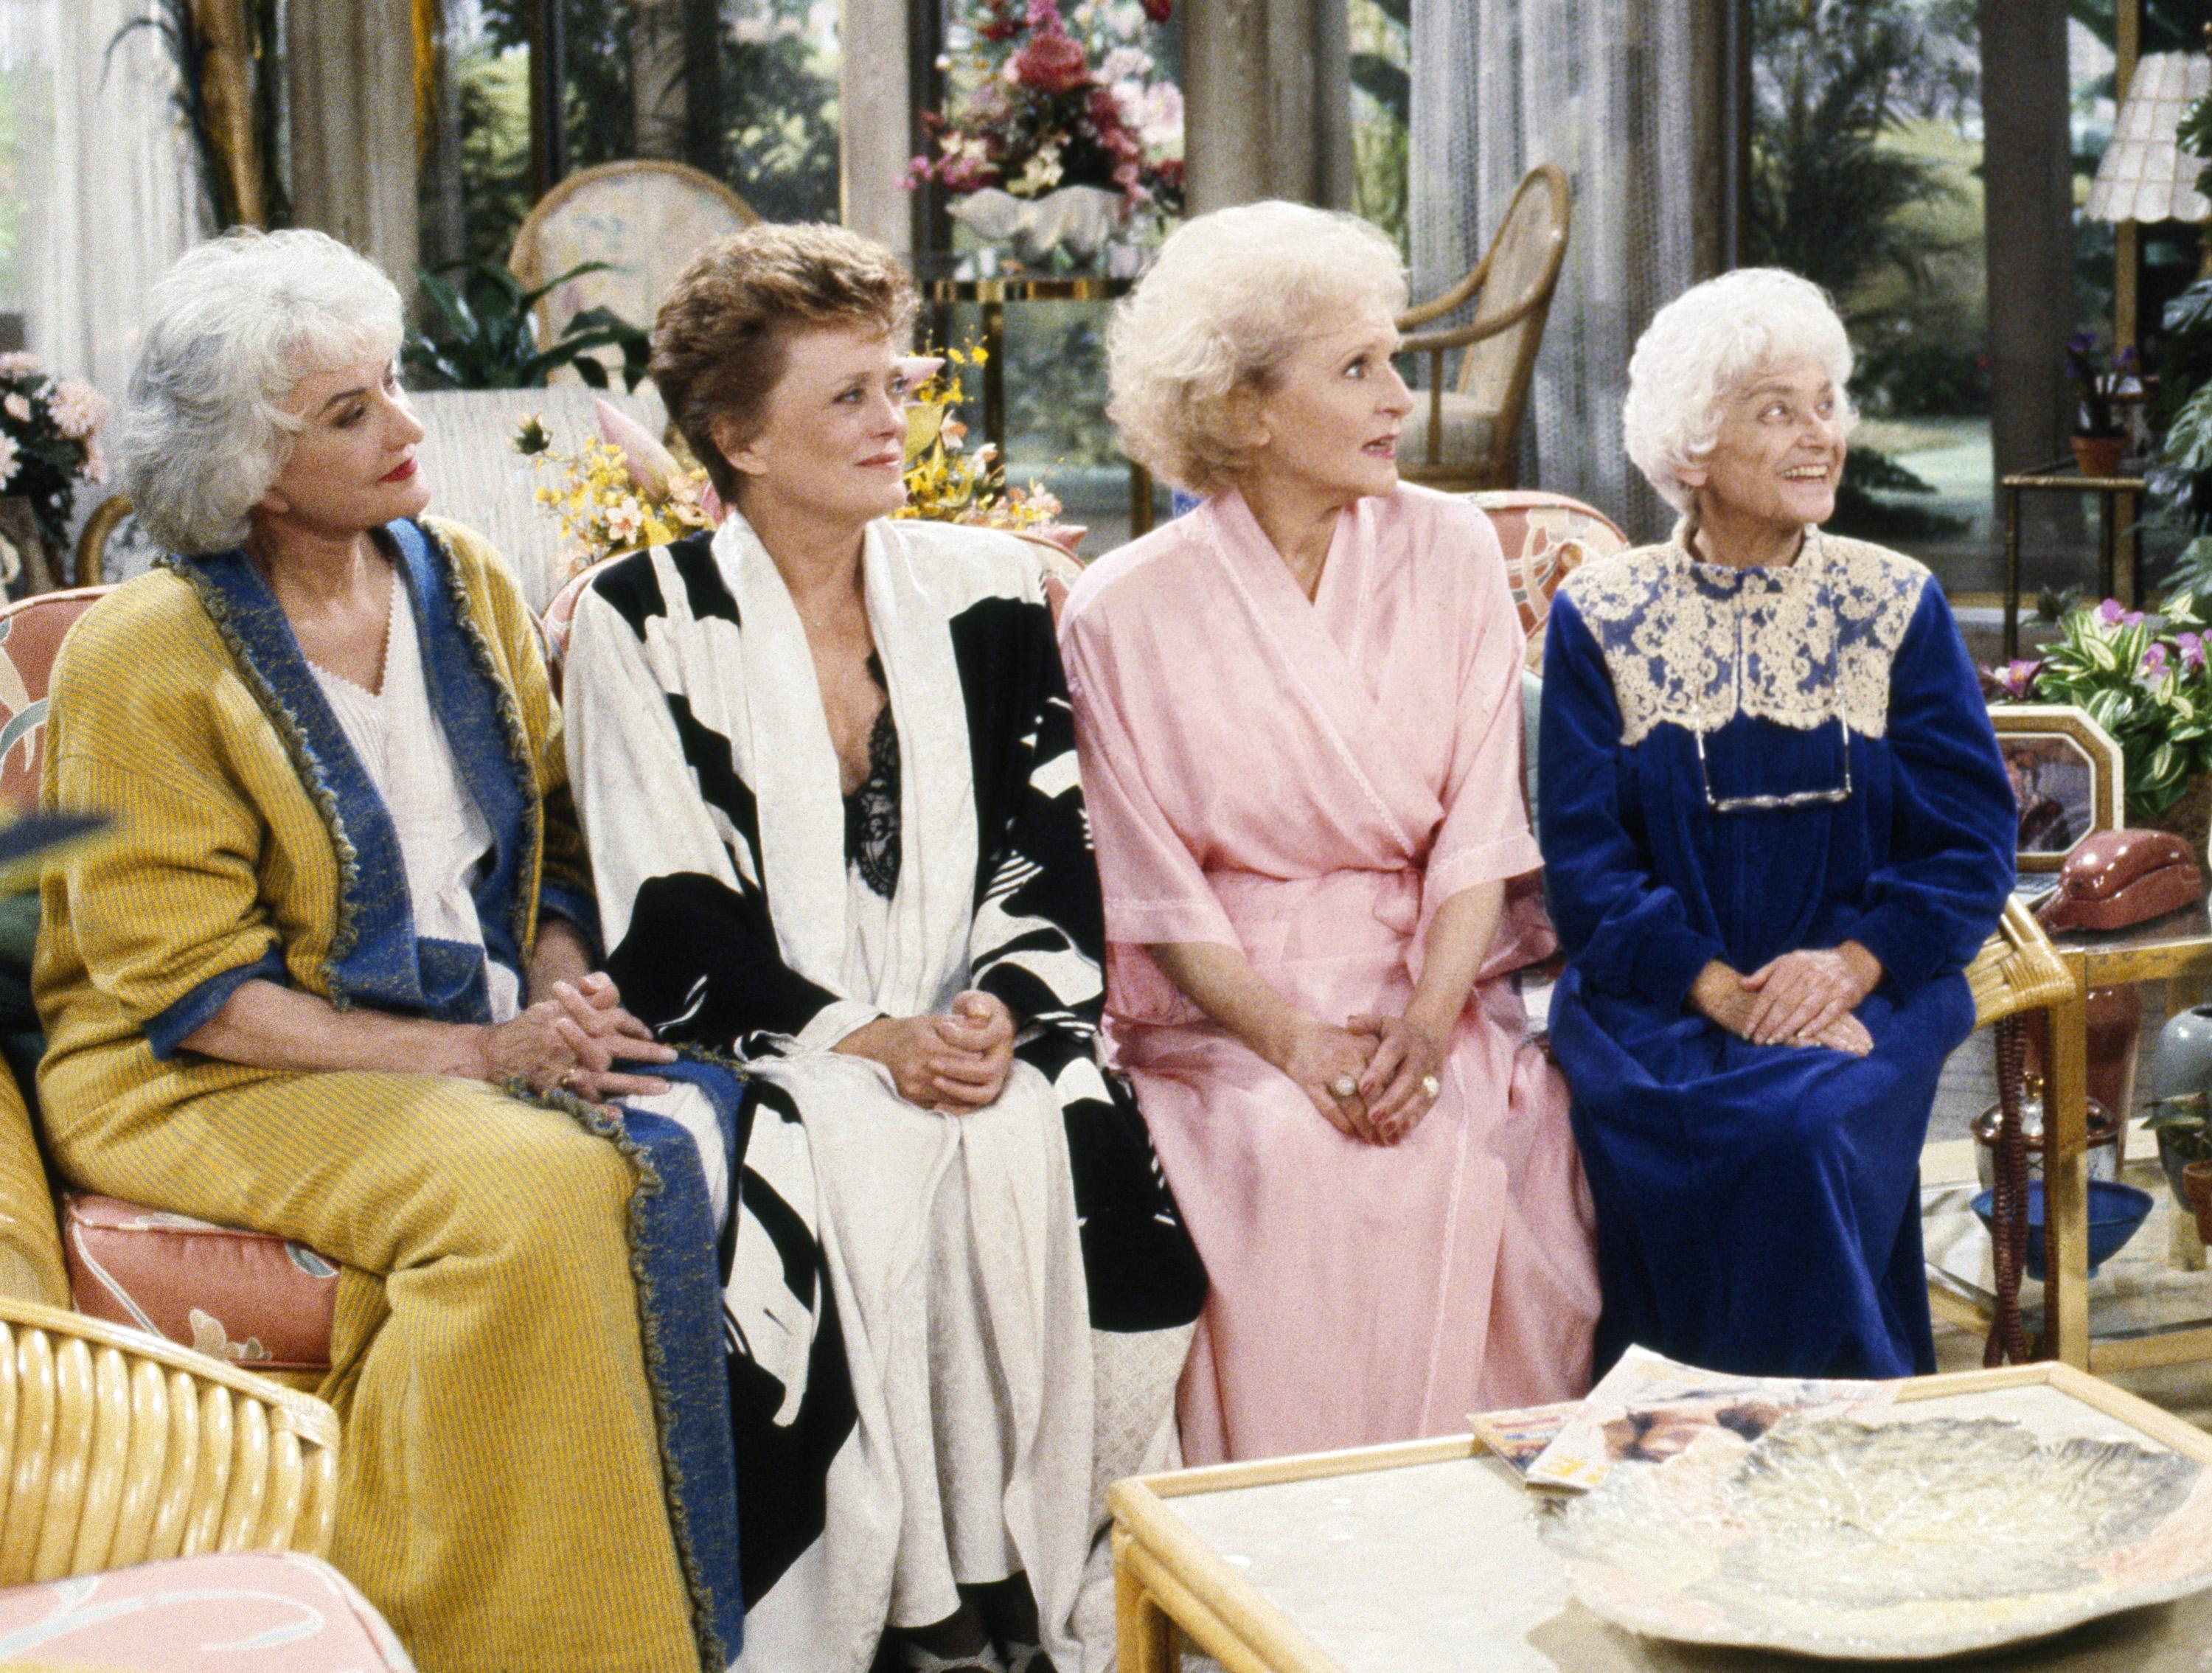 The Golden Girls cafe is finally open, banana wallpapers and all